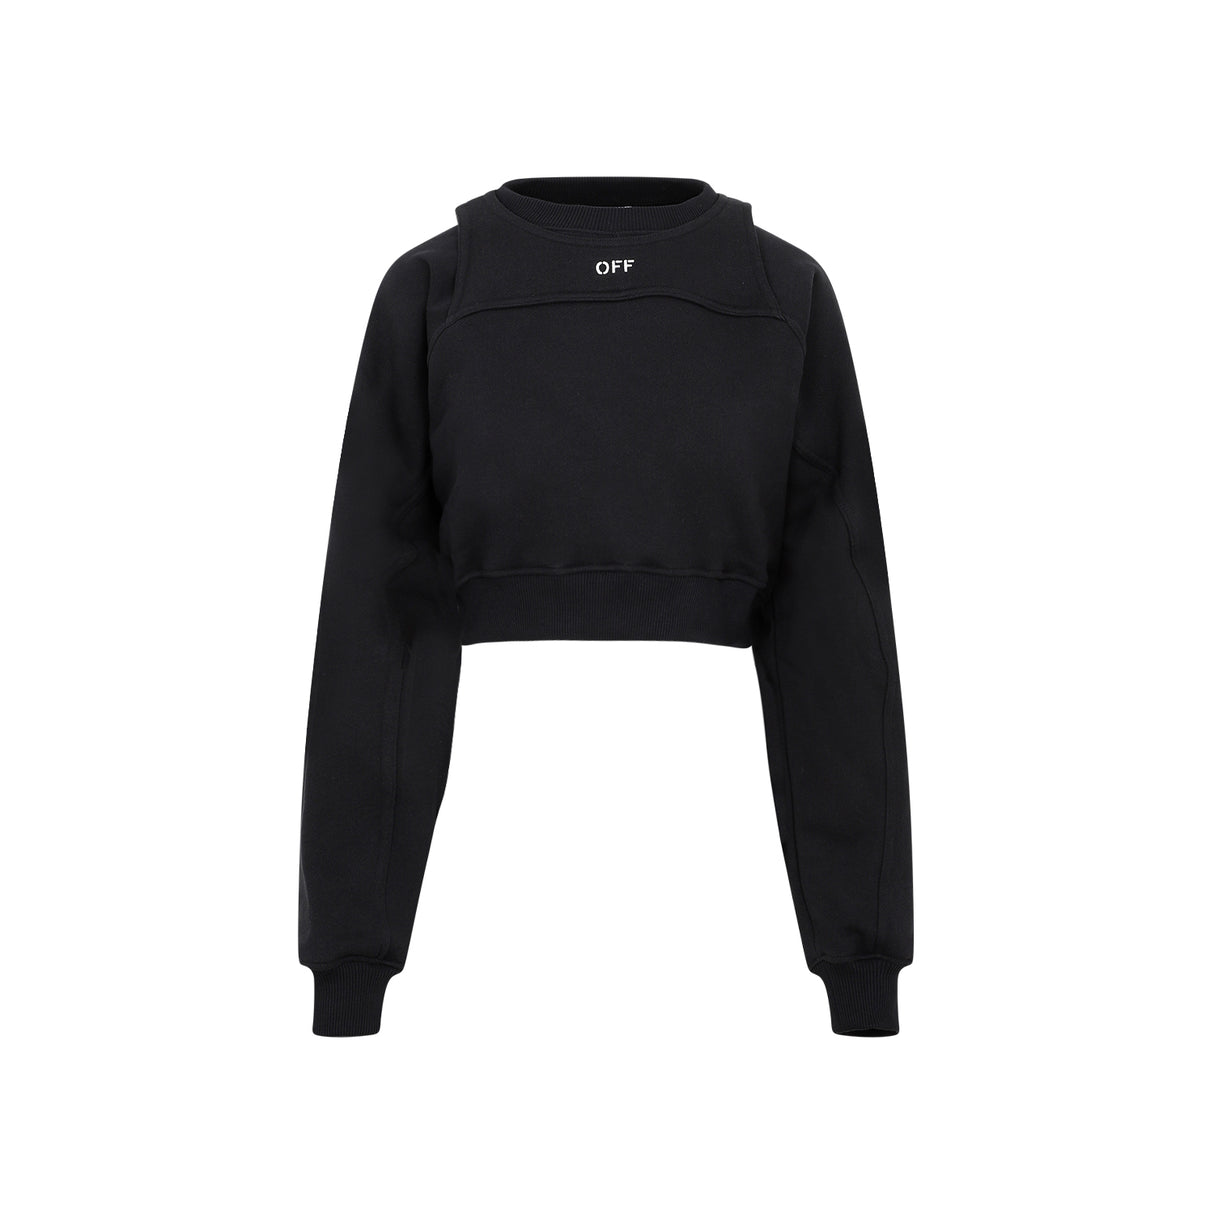 OFF-WHITE Black Cropped Cotton Sweatshirt for Women - FW23 Collection